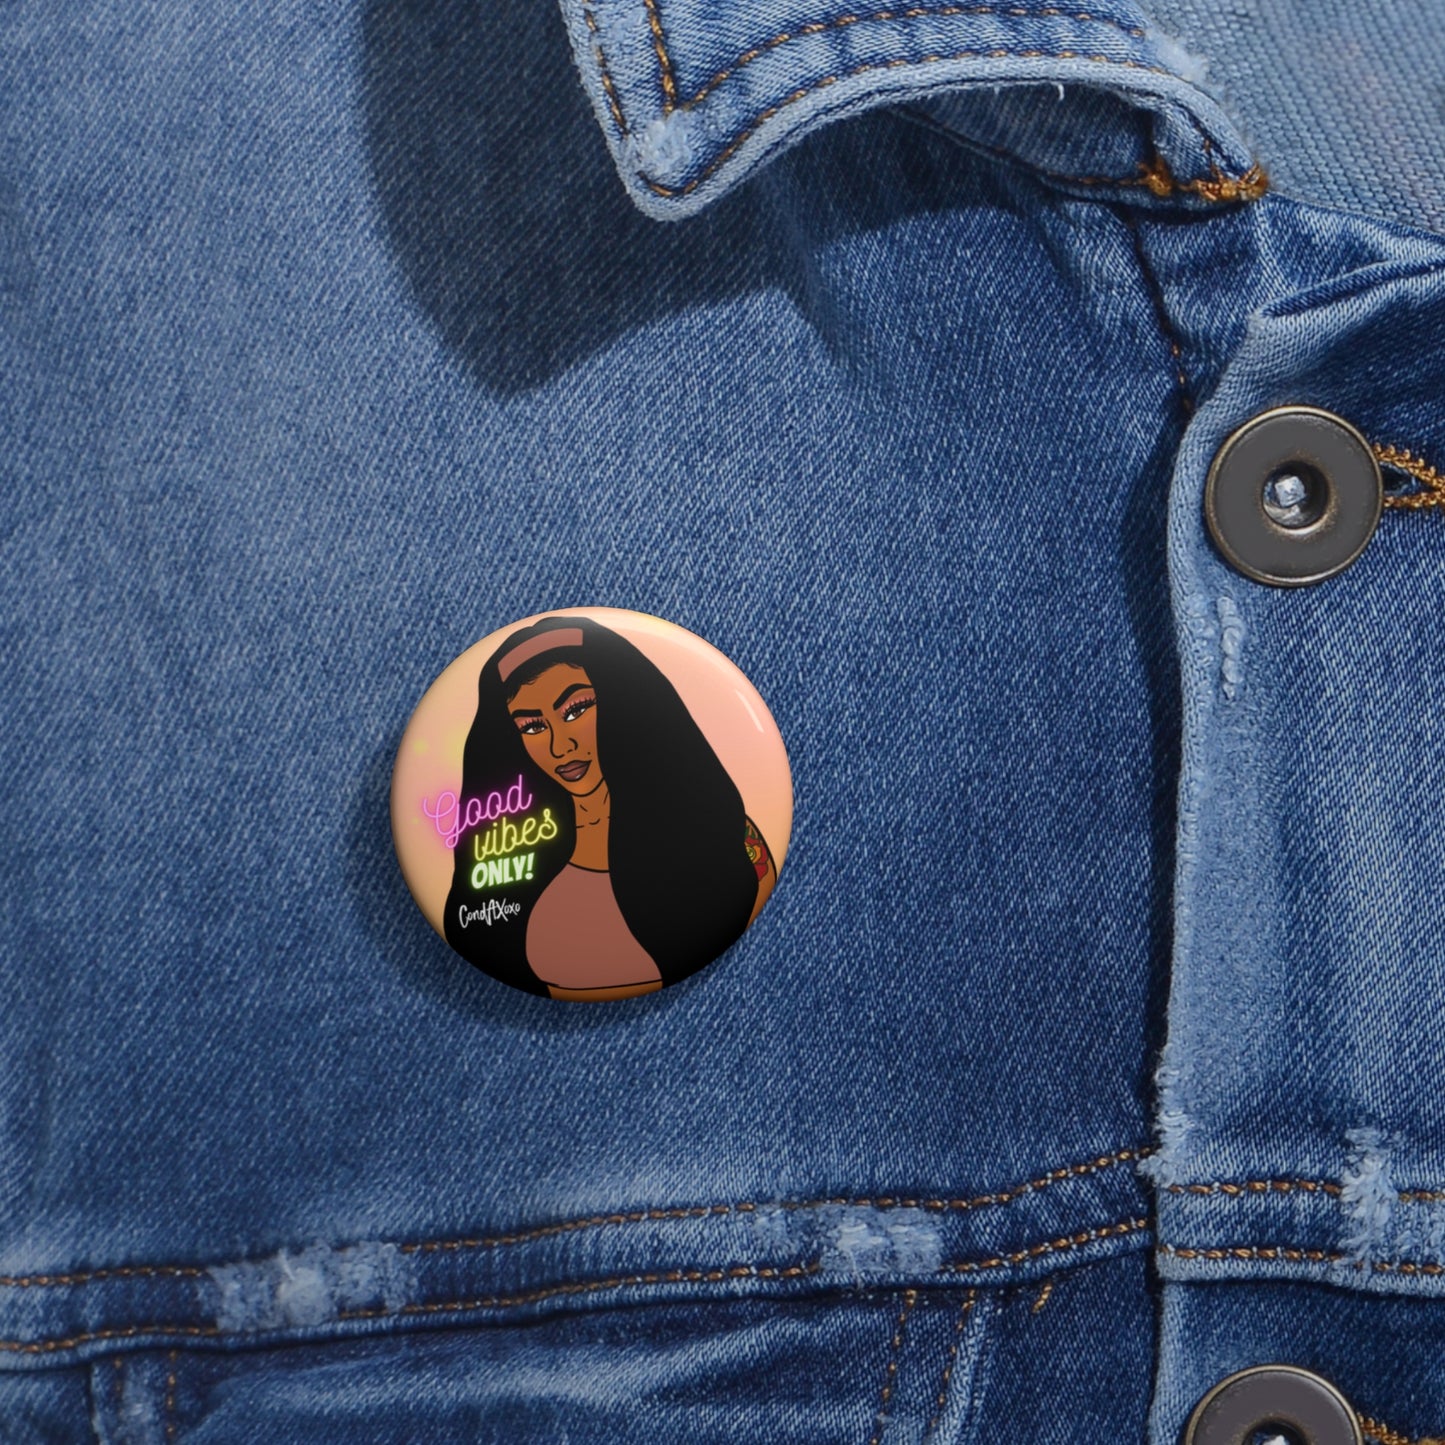 "Angie" Good Vibes Pinback Button